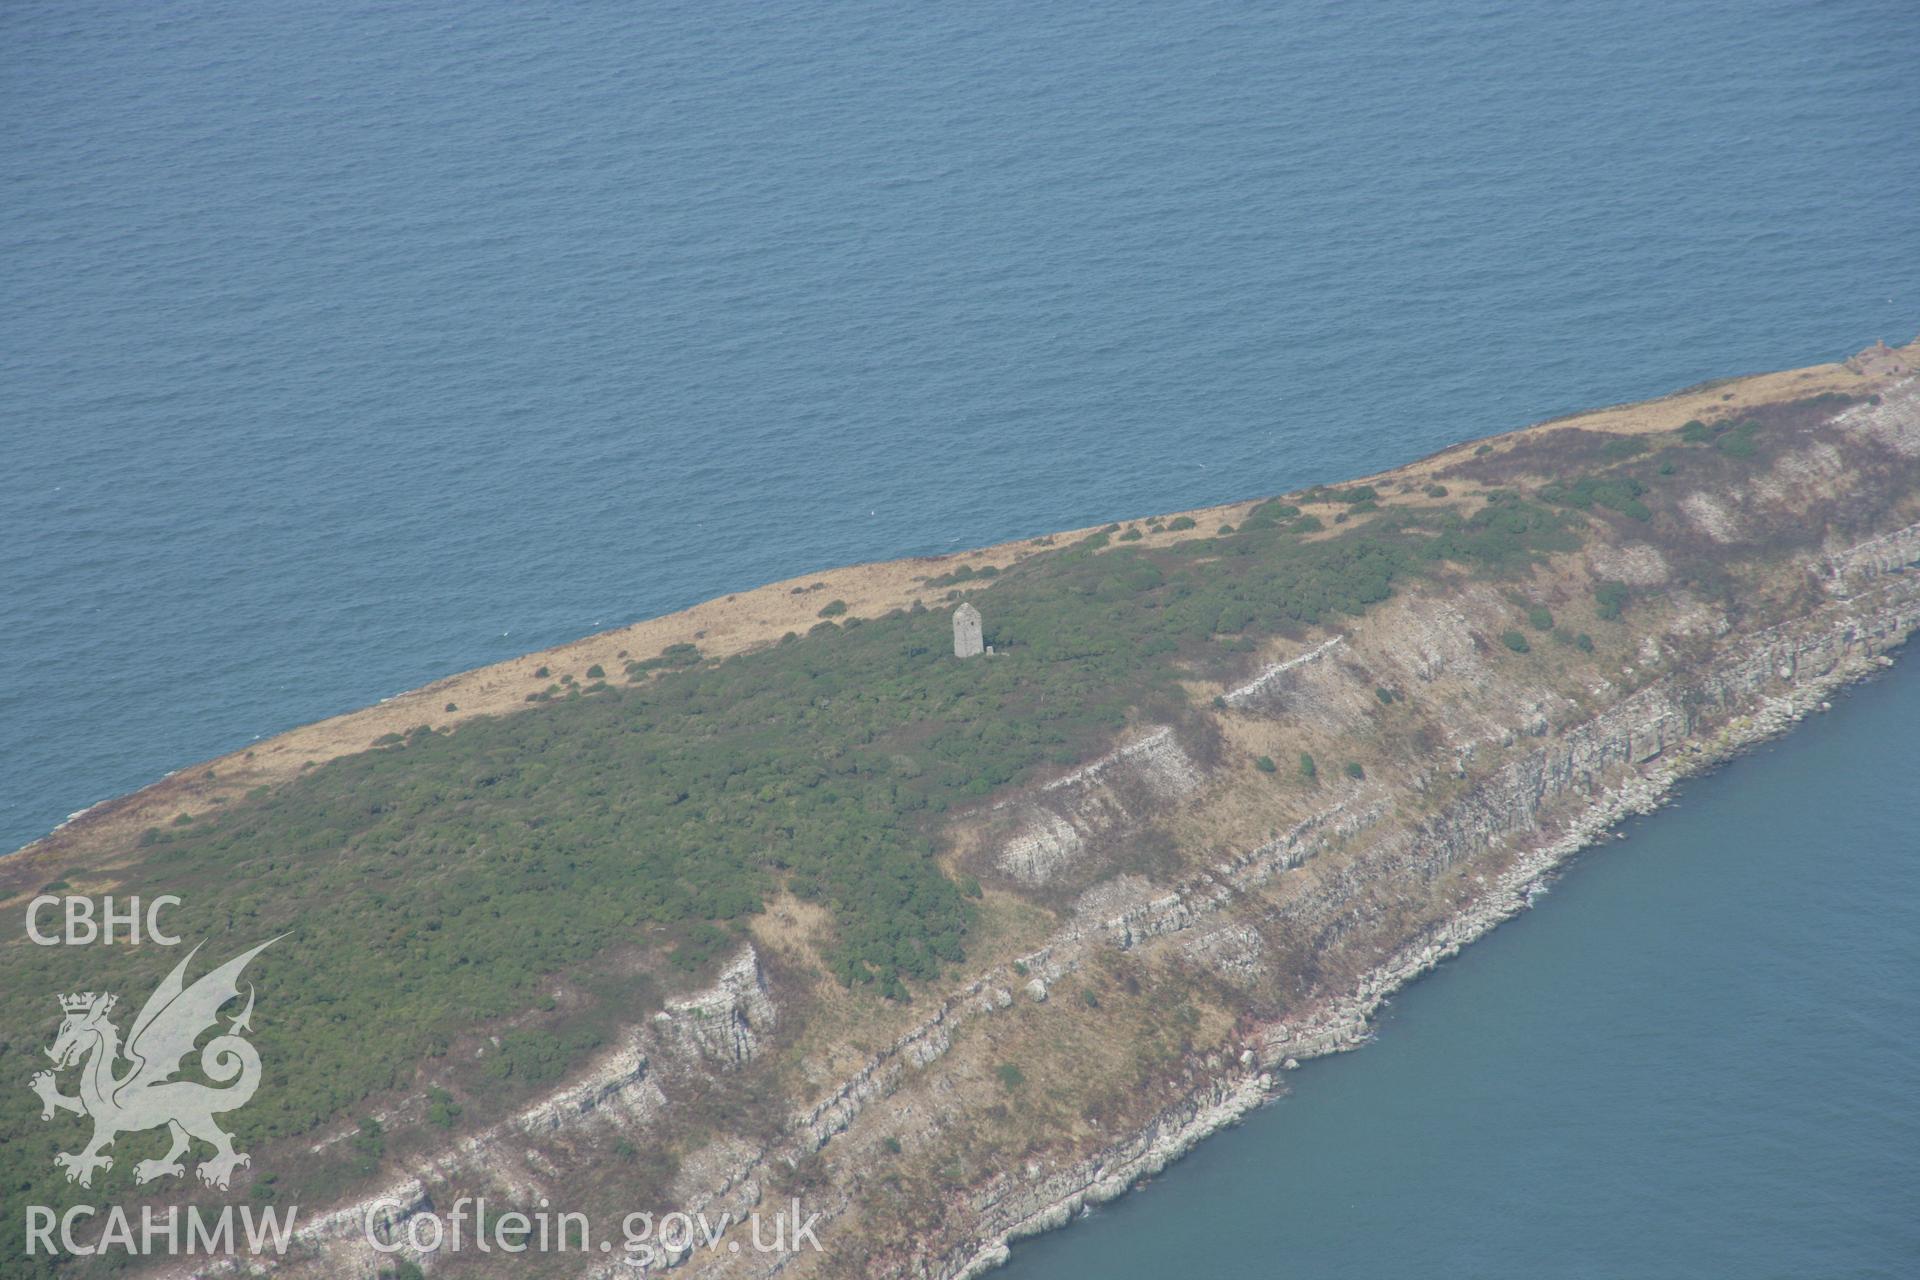 RCAHMW colour oblique aerial photograph of a cell of Penmon Priory on Puffin Island (or Priestholm). Taken on 14 August 2006 by Toby Driver